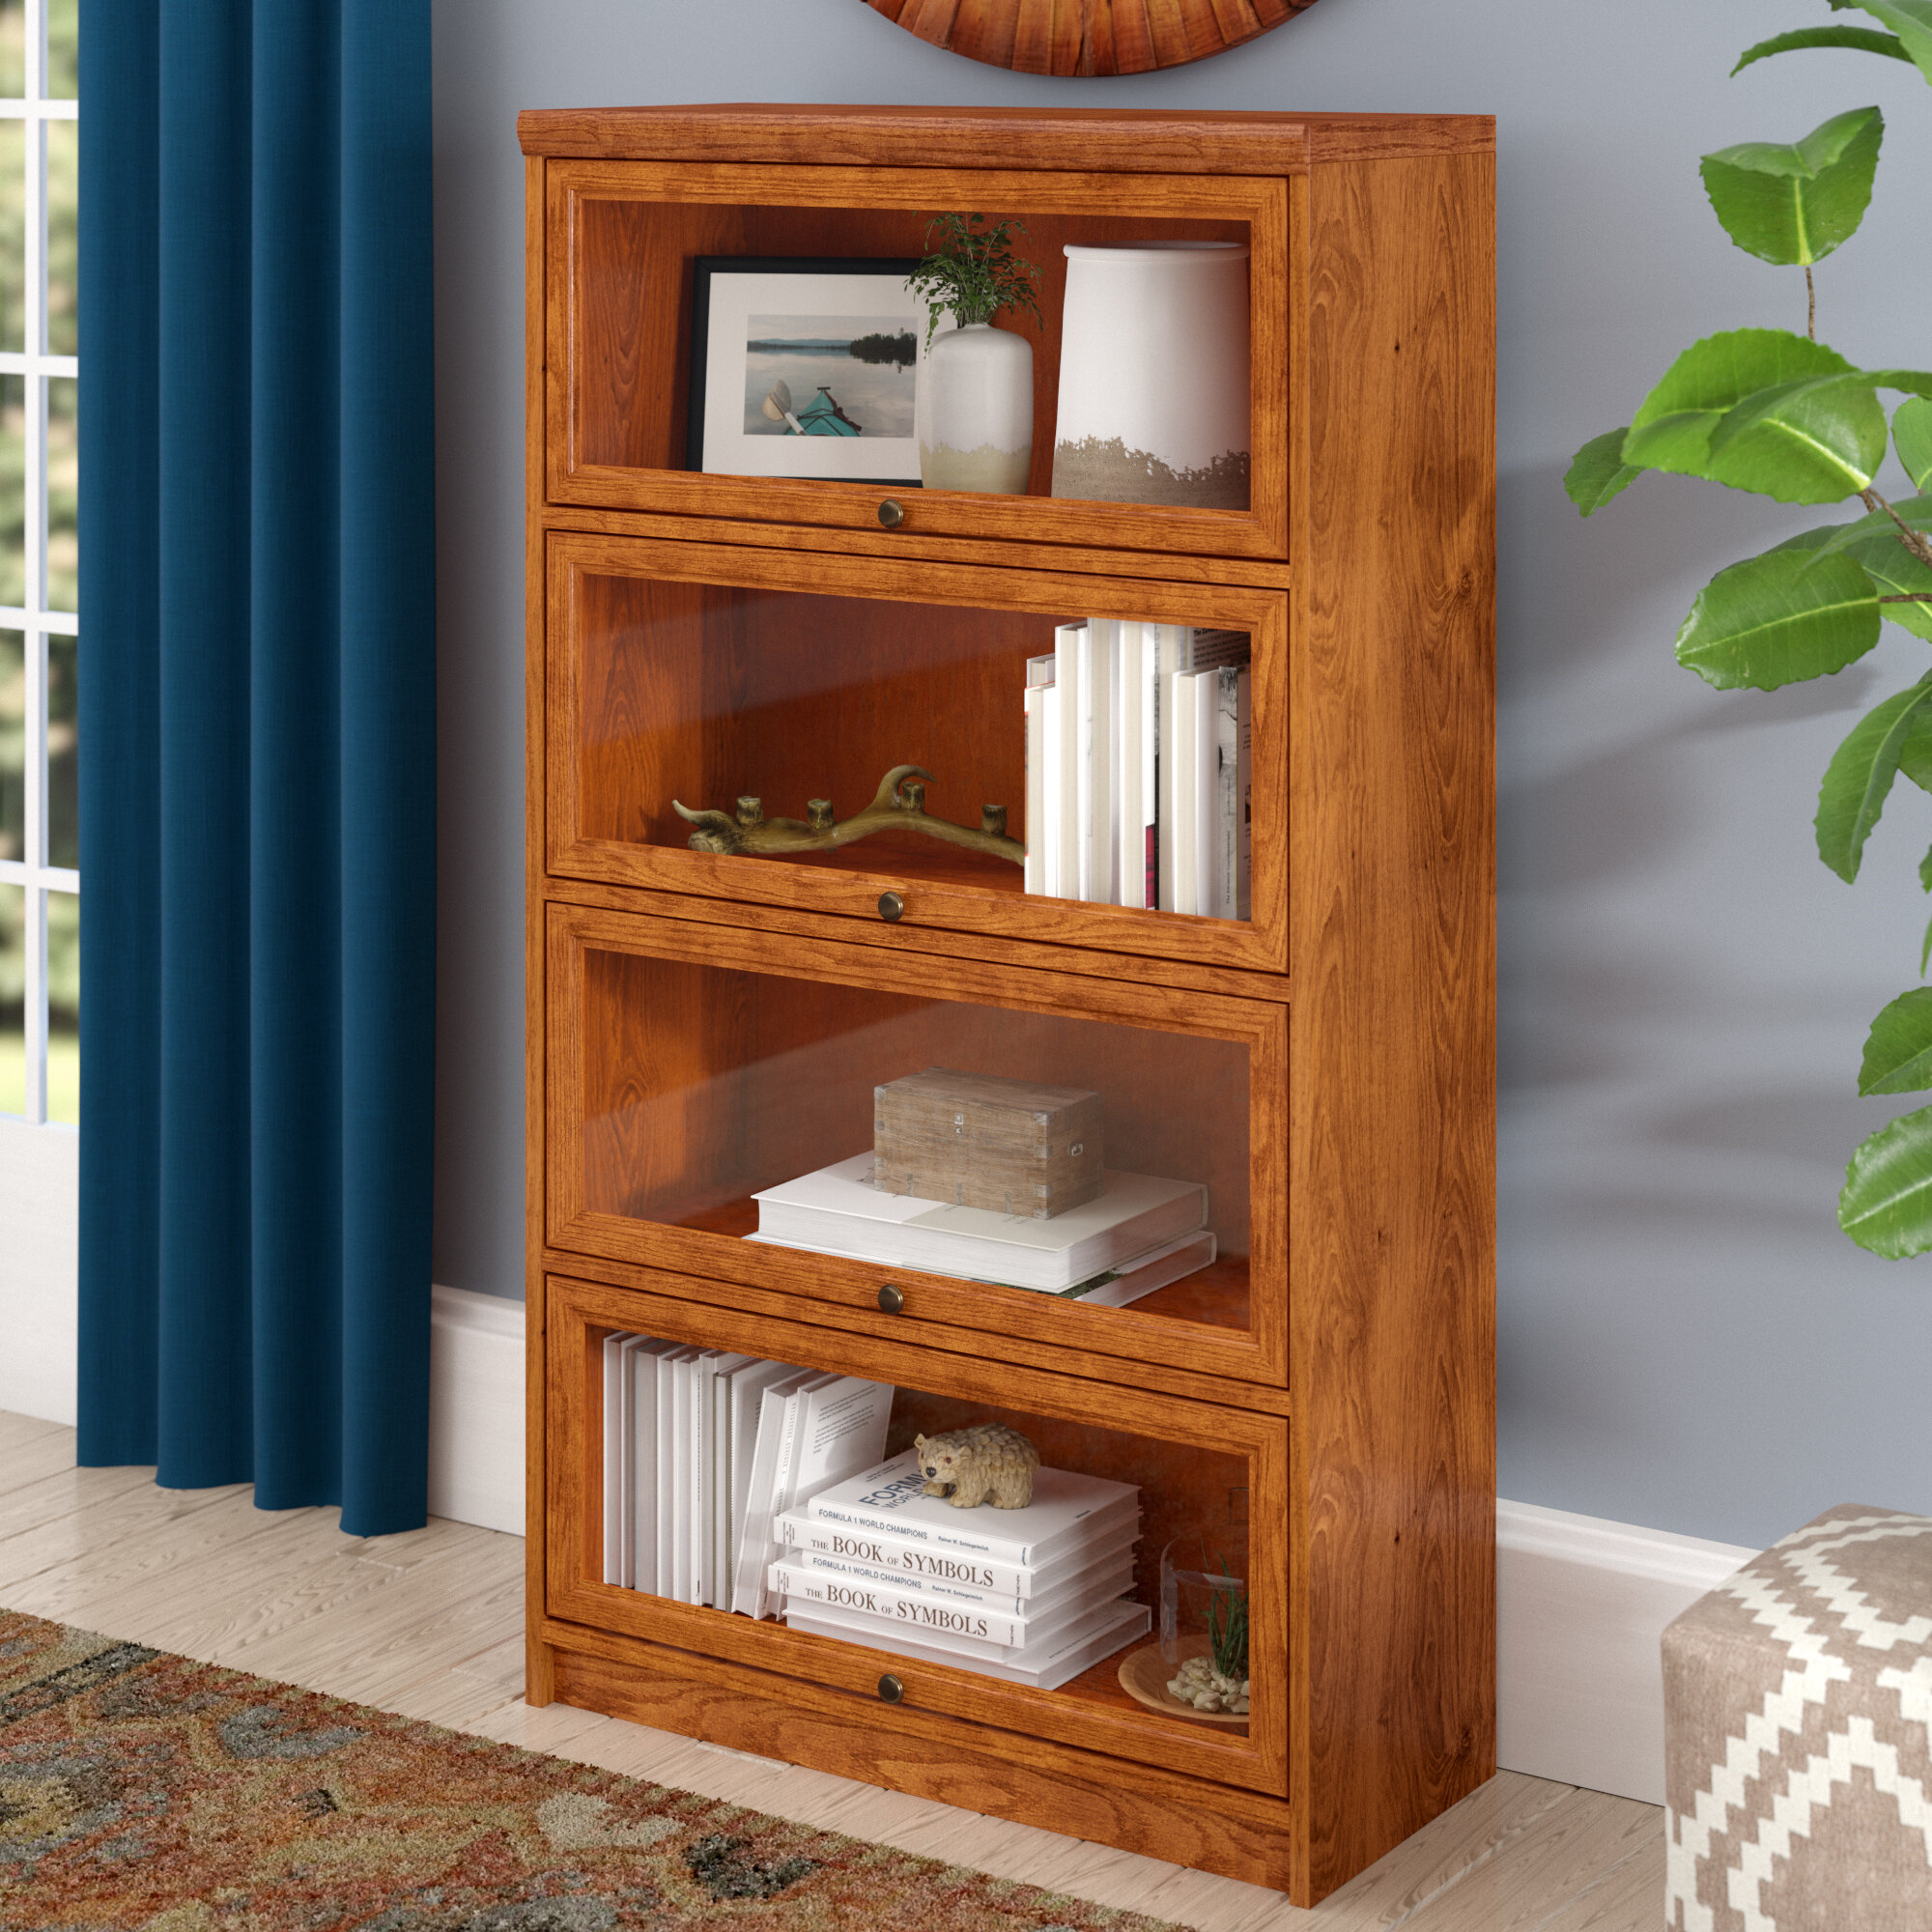 Bookcase With Glass Doors Visualhunt, Unfinished Wood Bookcase With Glass Doors